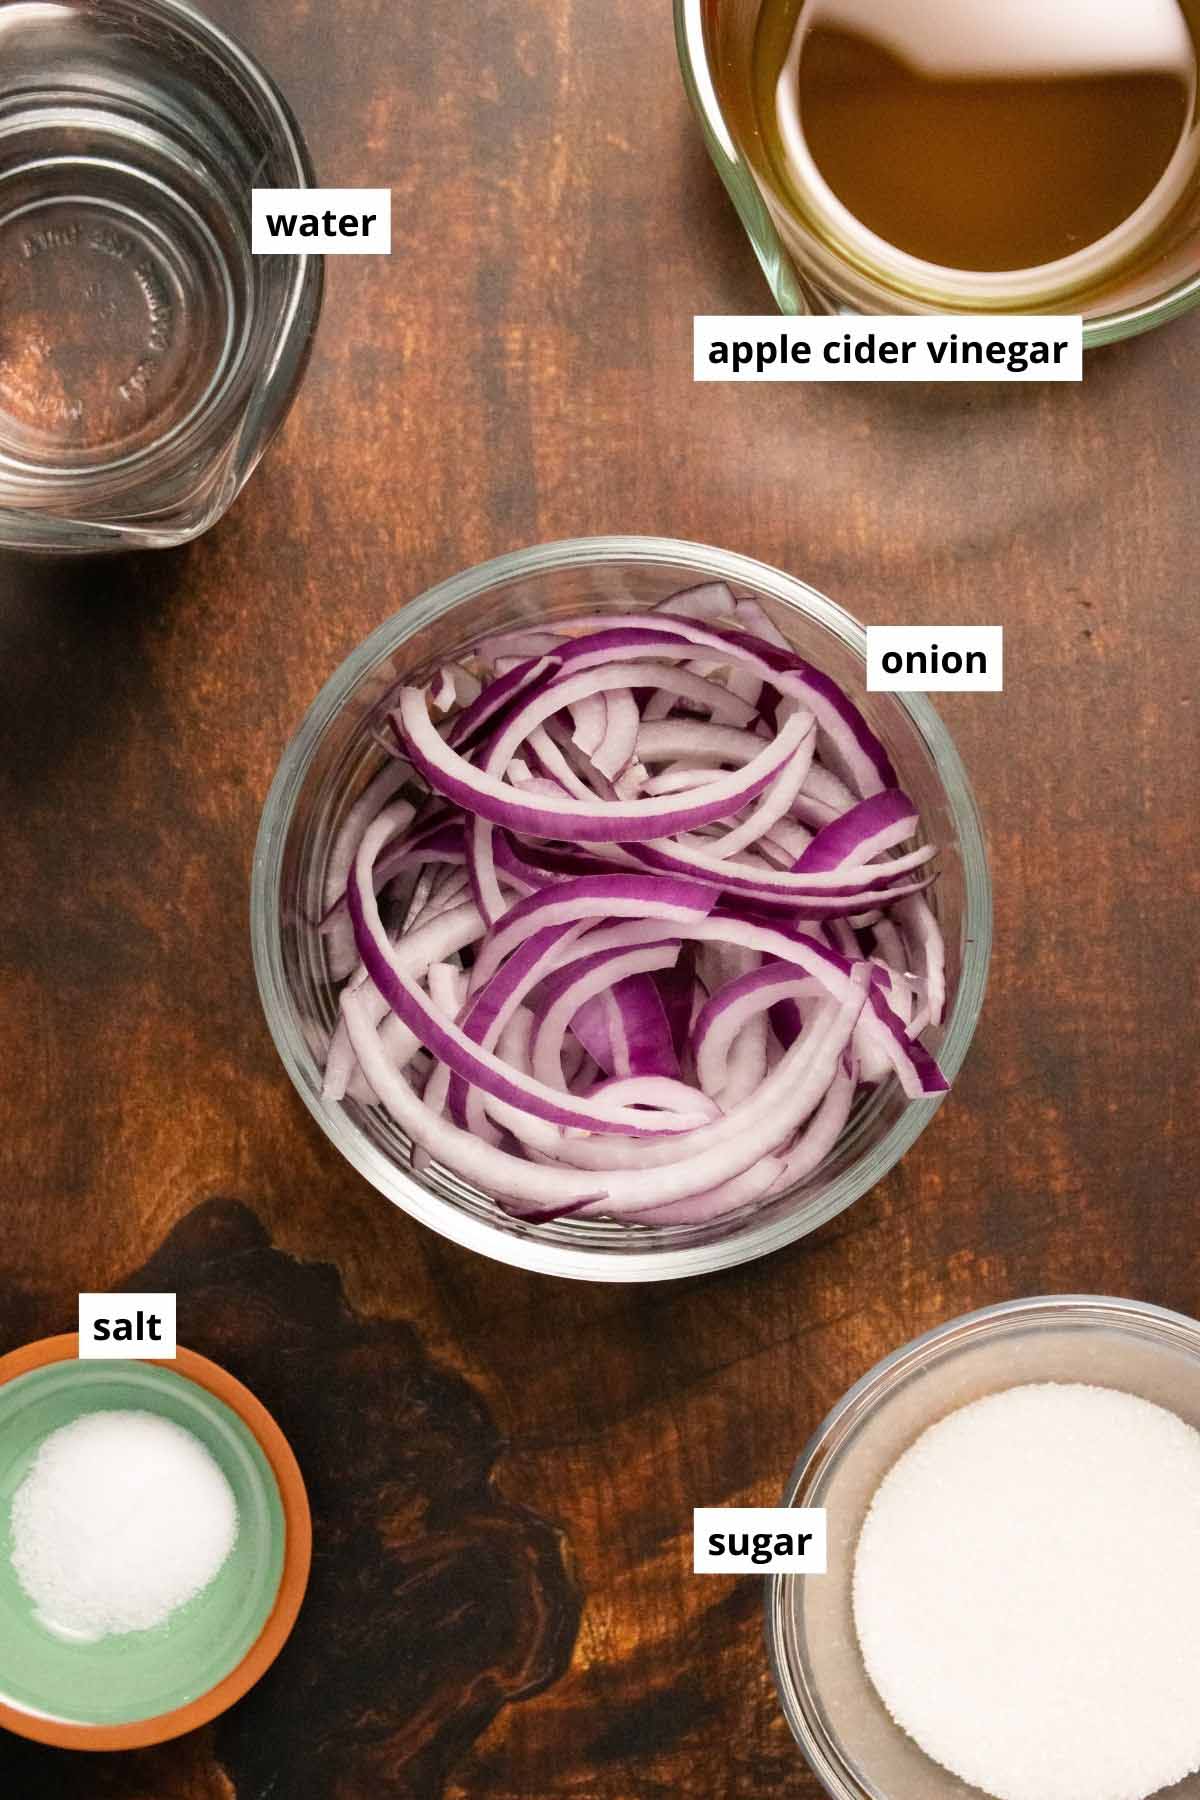 pickled onion ingredients in bowls on a wooden table